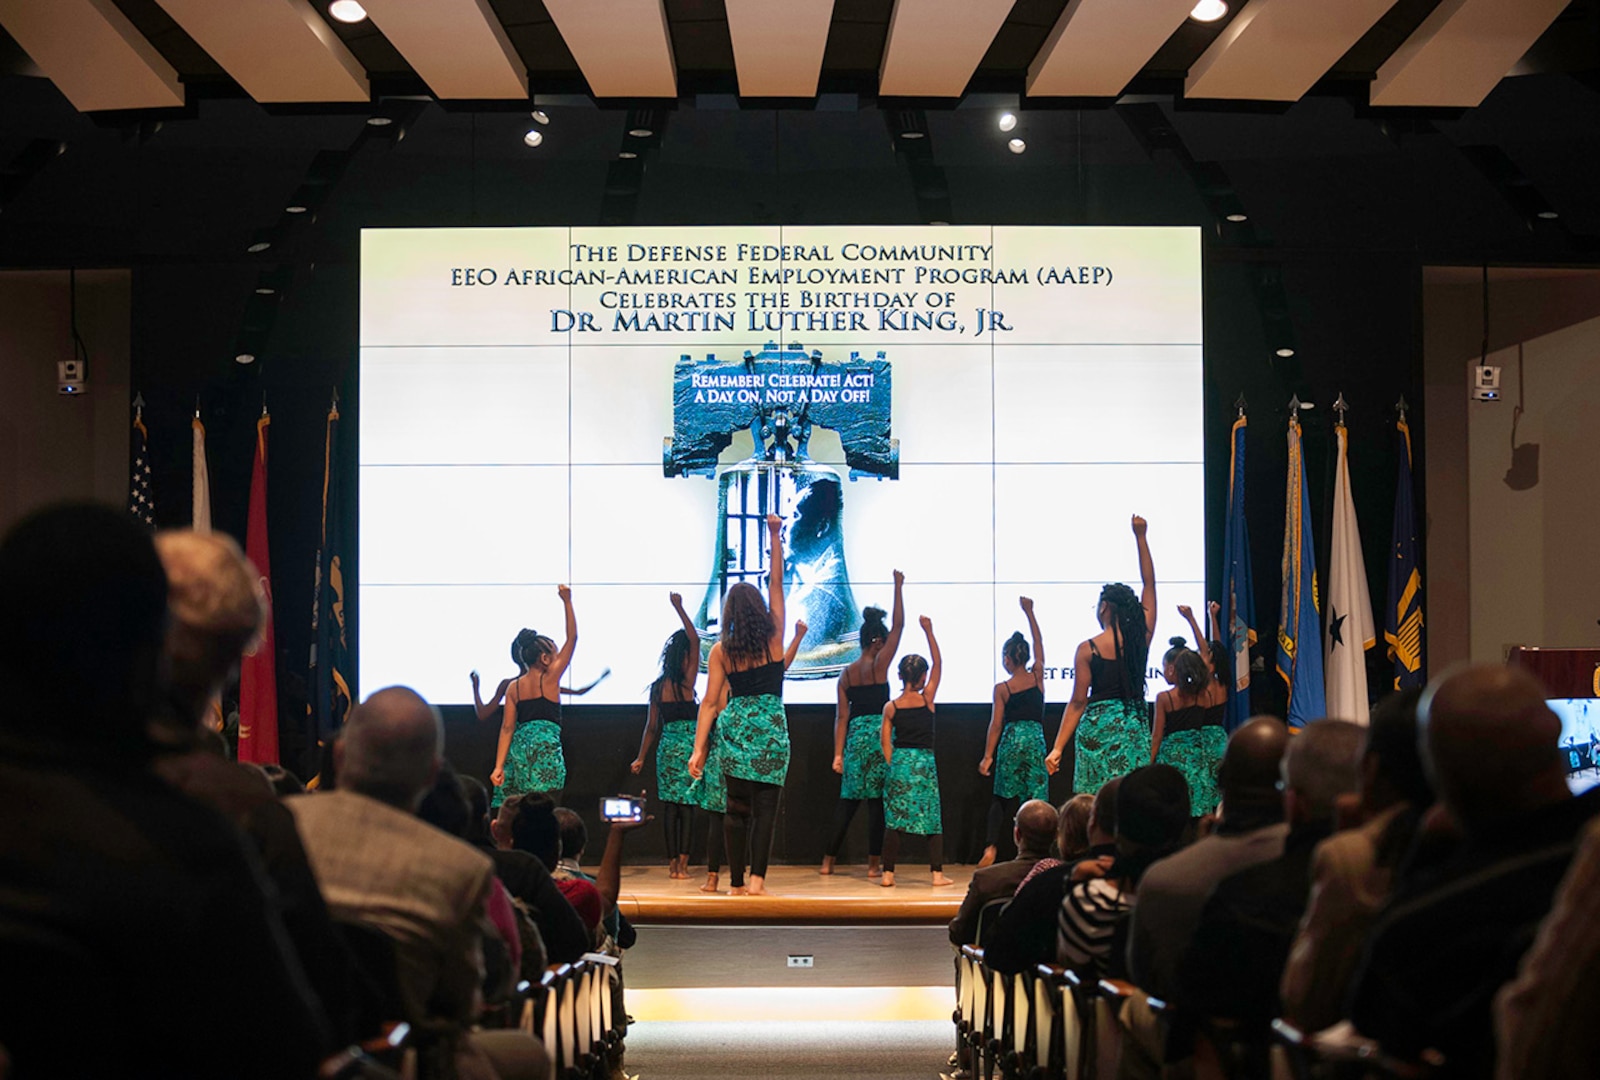 The Columbus Optimistic Ladies perform a dance routine during the Dr. Martin Luther King Jr. birthday observance ceremony at Defense Supply Center Columbus. The Jan. 19 event featured music, performances, and a presentation honoring the life and legacy of Dr. King.